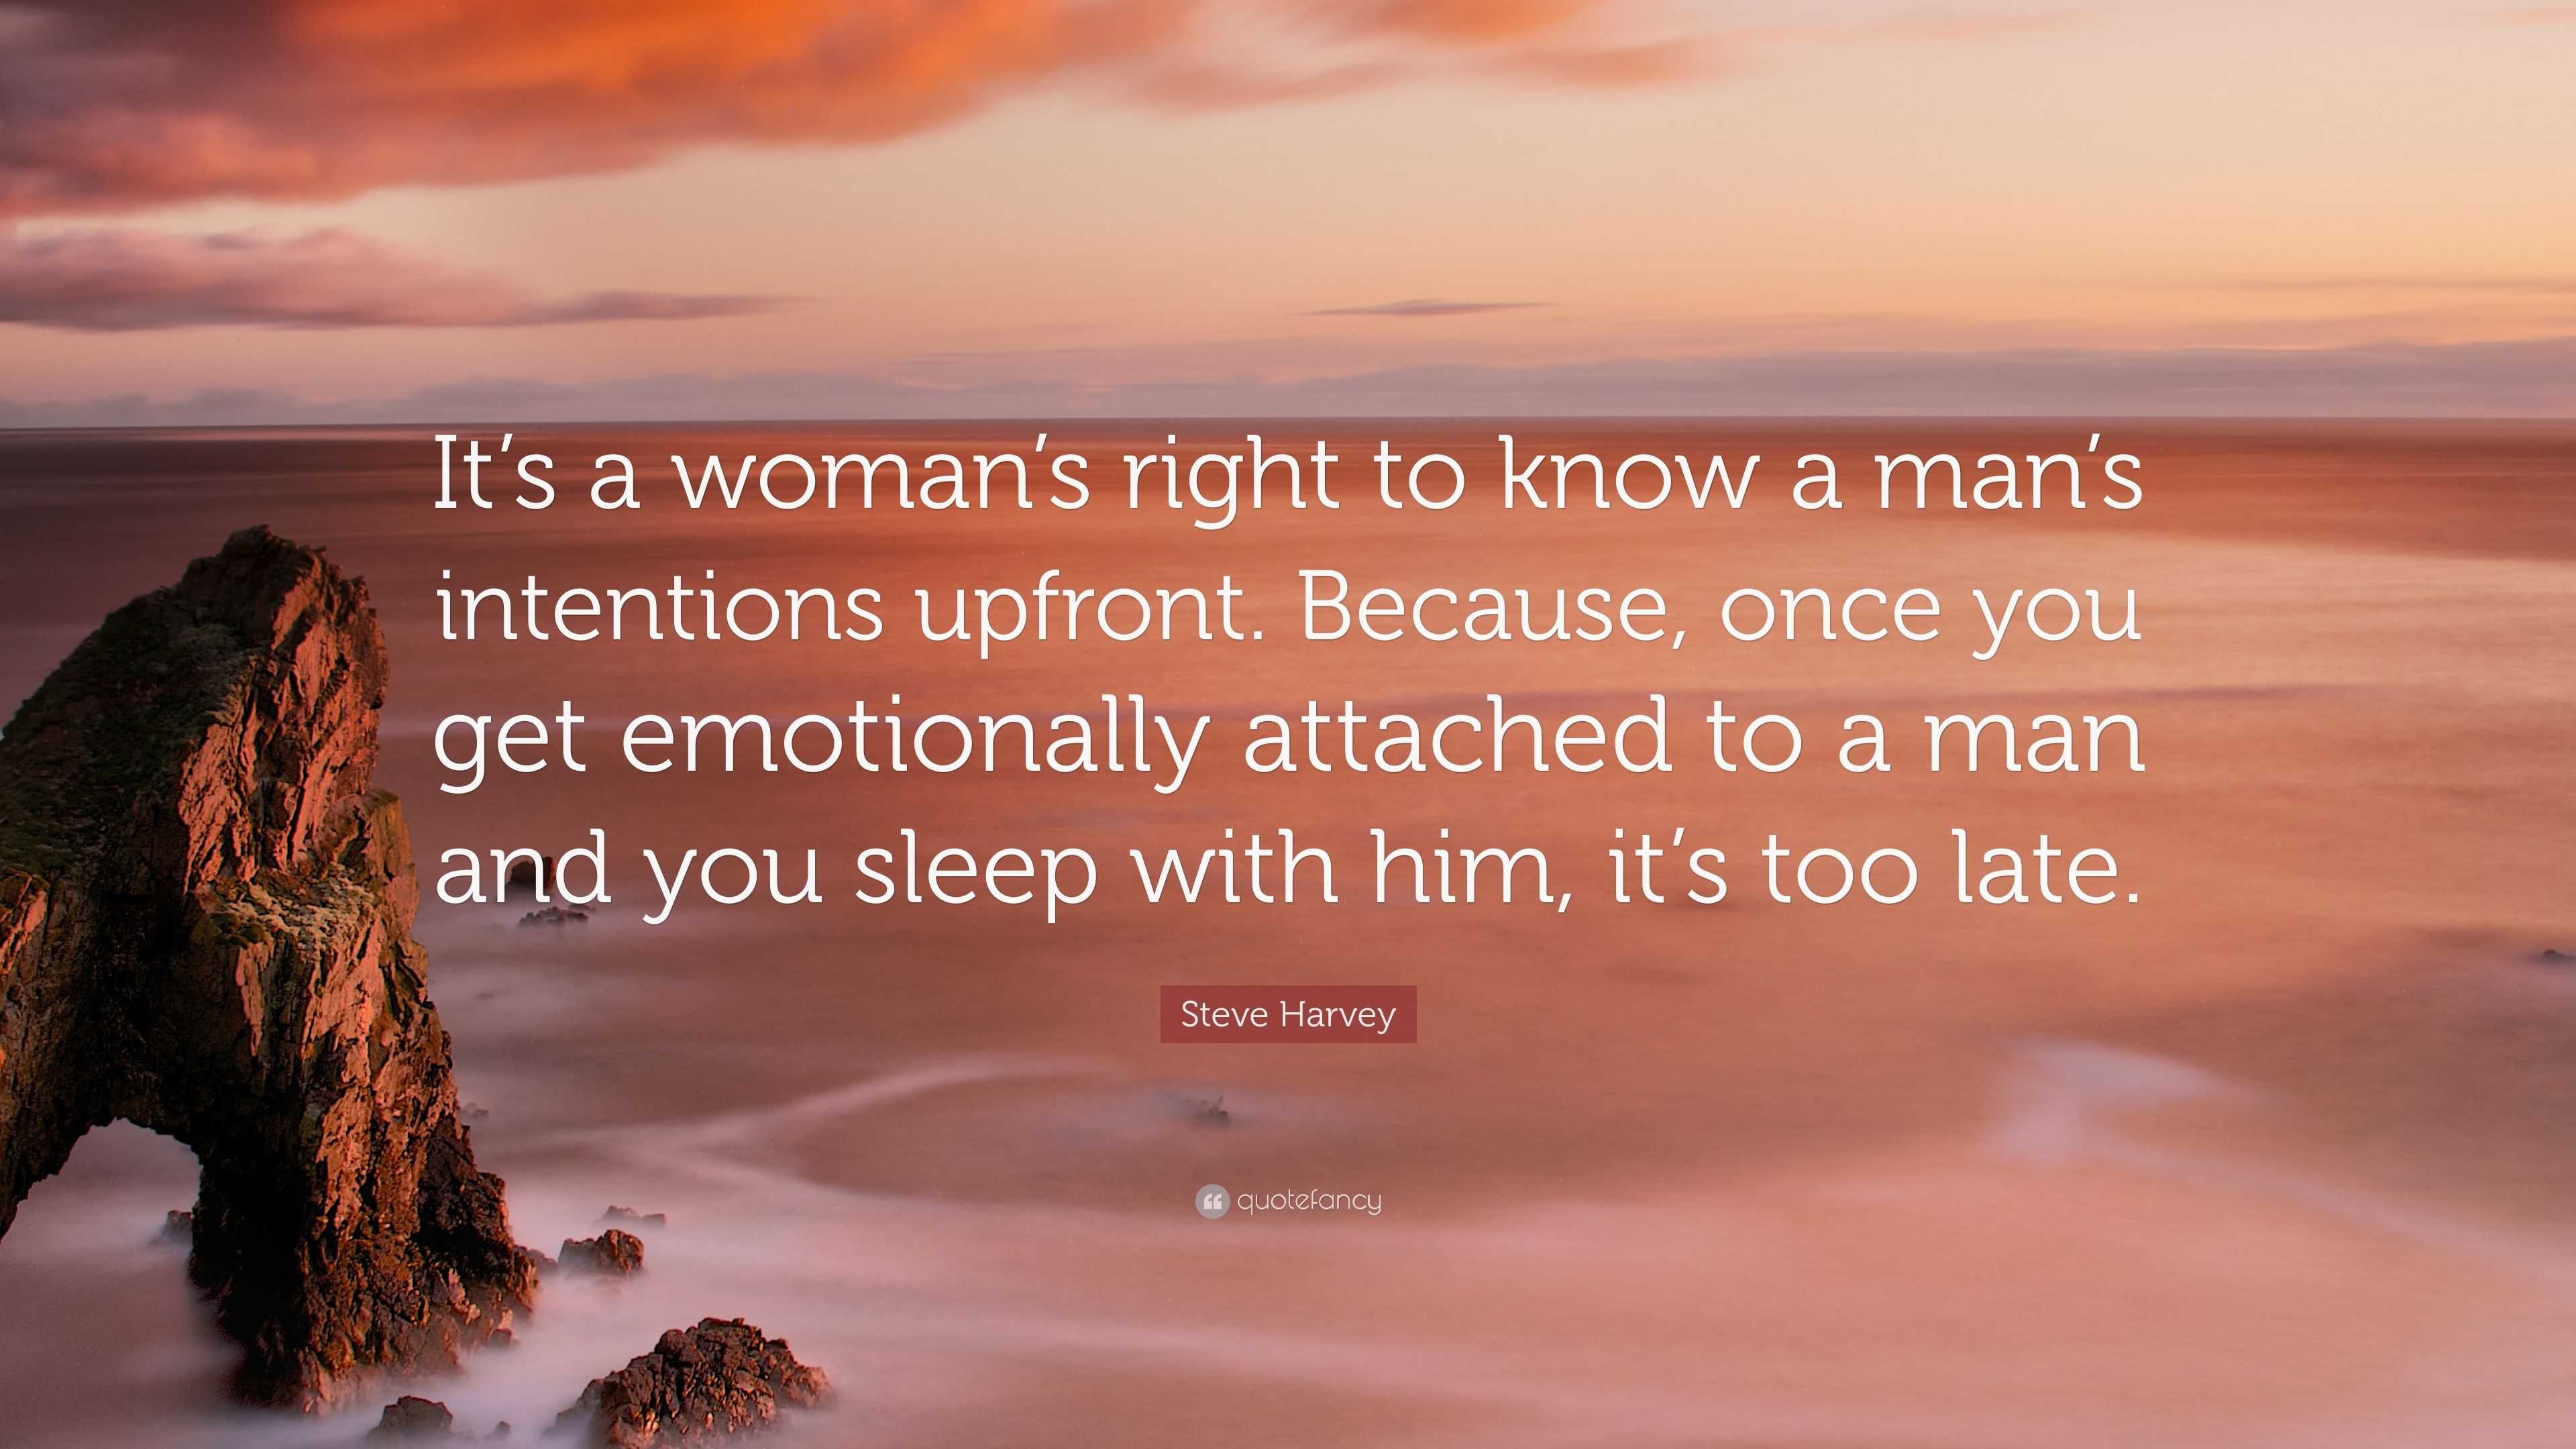 5007323 Steve Harvey Quote It s a woman s right to know a man s intentions